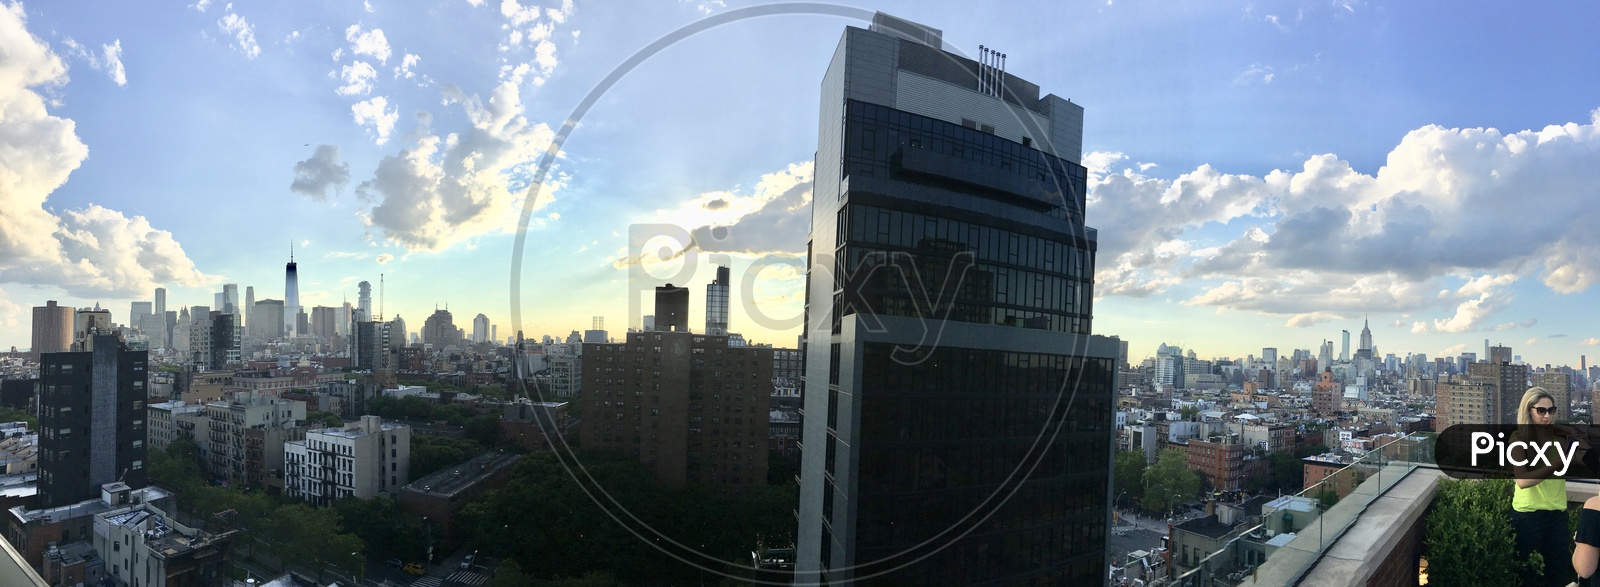 Panaromic View of Manhattan from a Roof Top Bar.